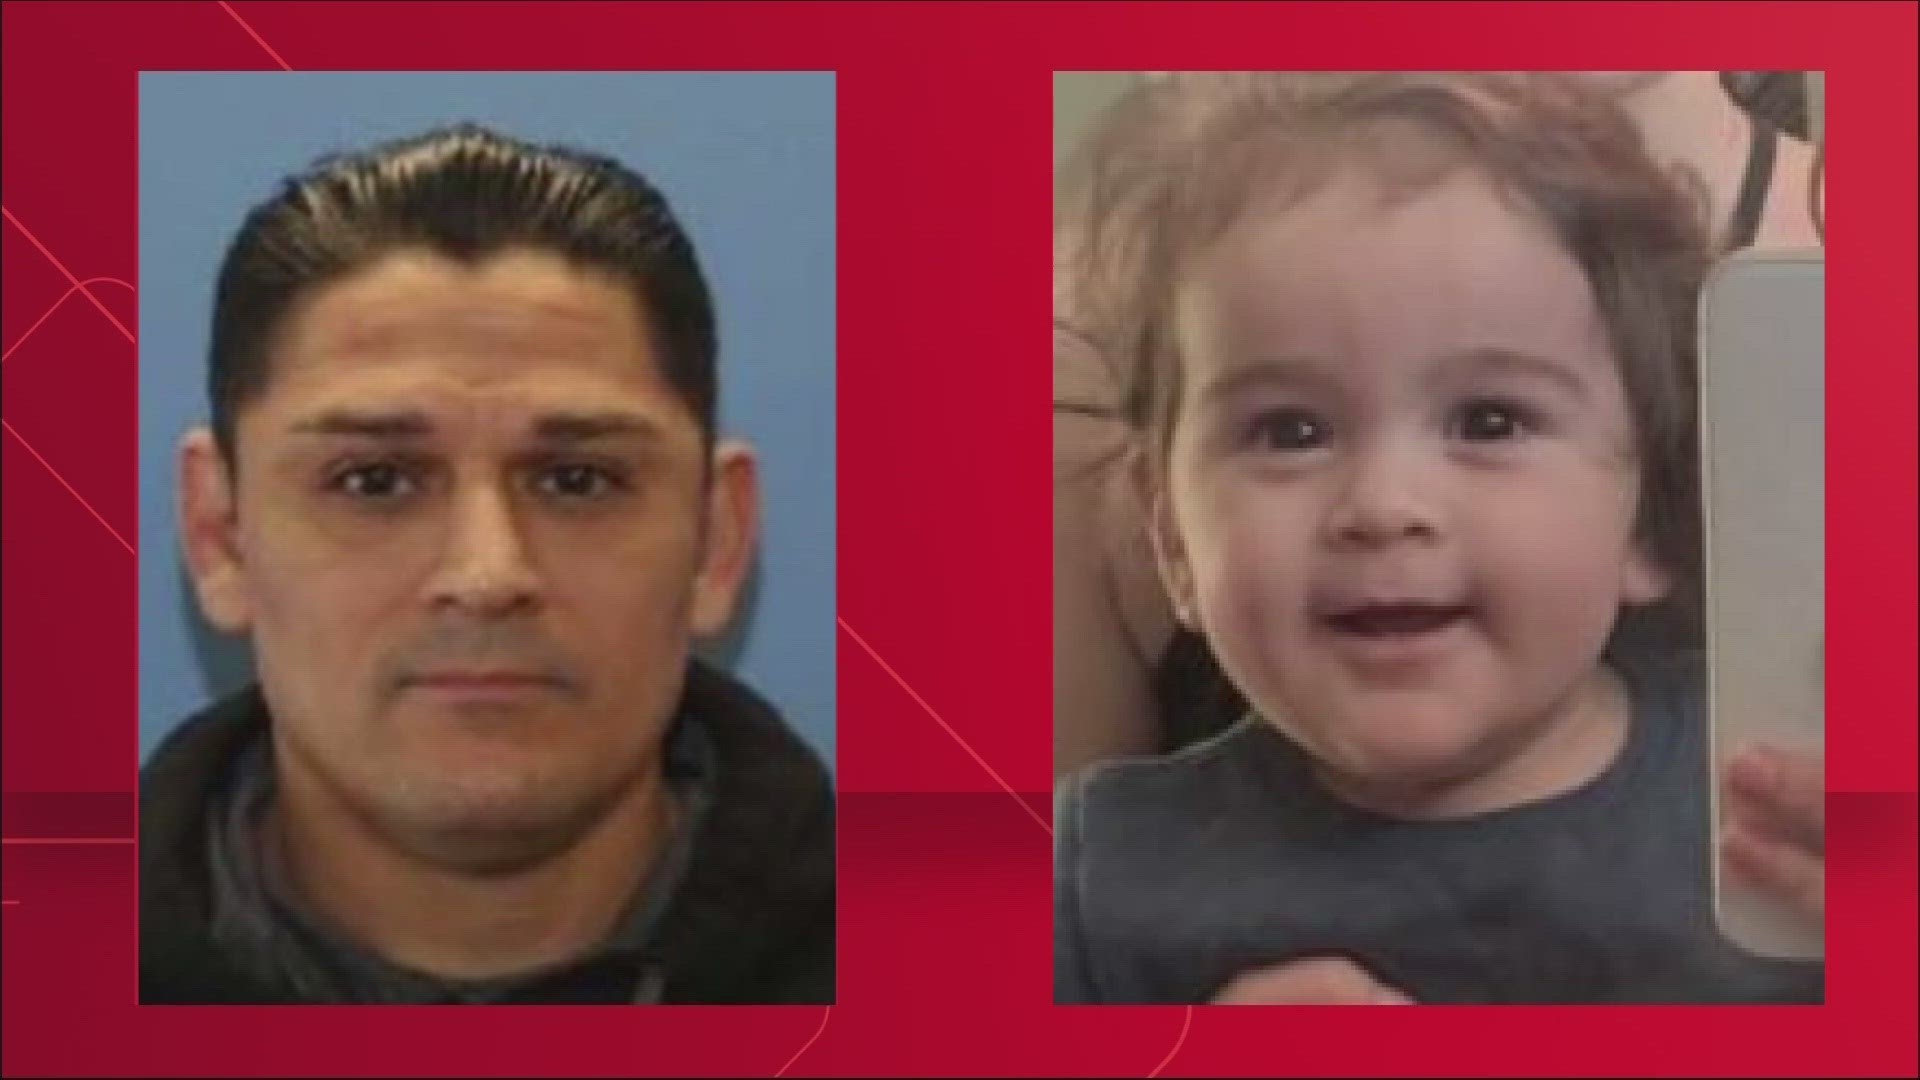 Elias Huizar is suspected of killing his ex-wife and girlfriend and abducting a 1-year-old, sparking a manhunt. He was found following a police chase in Eugene.